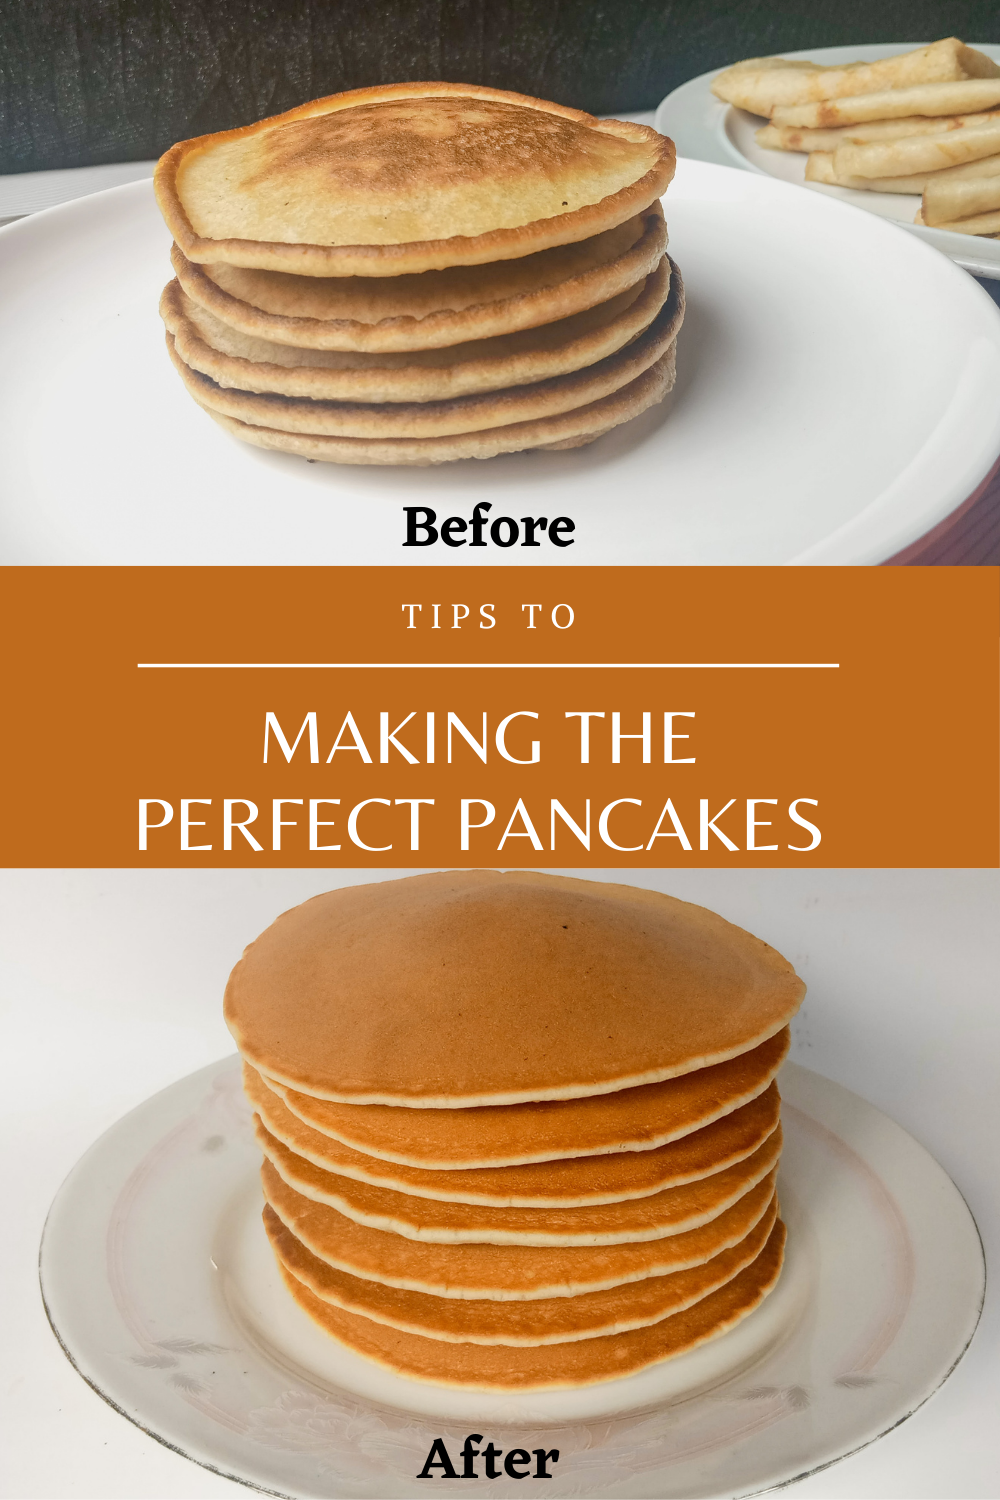 How to make the perfect pancakes